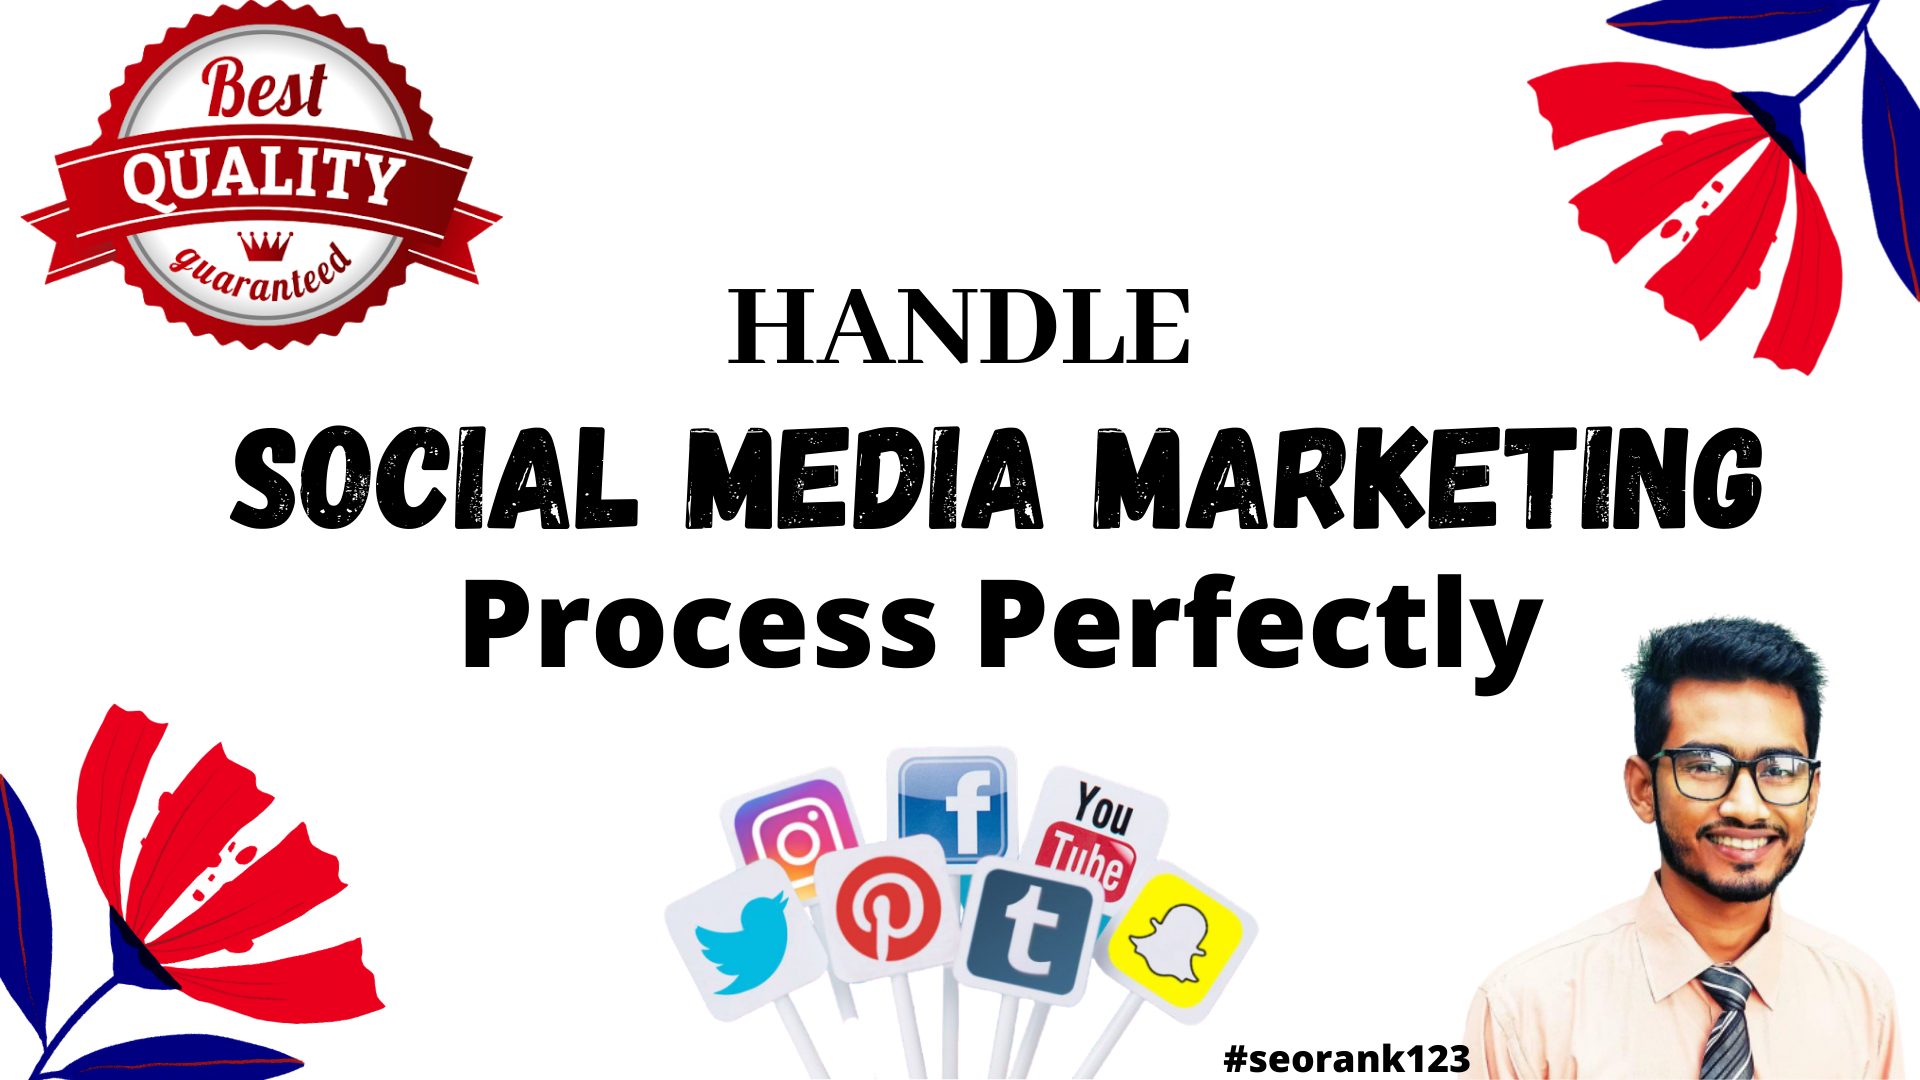 16127Manage your social media marketing process perfectly